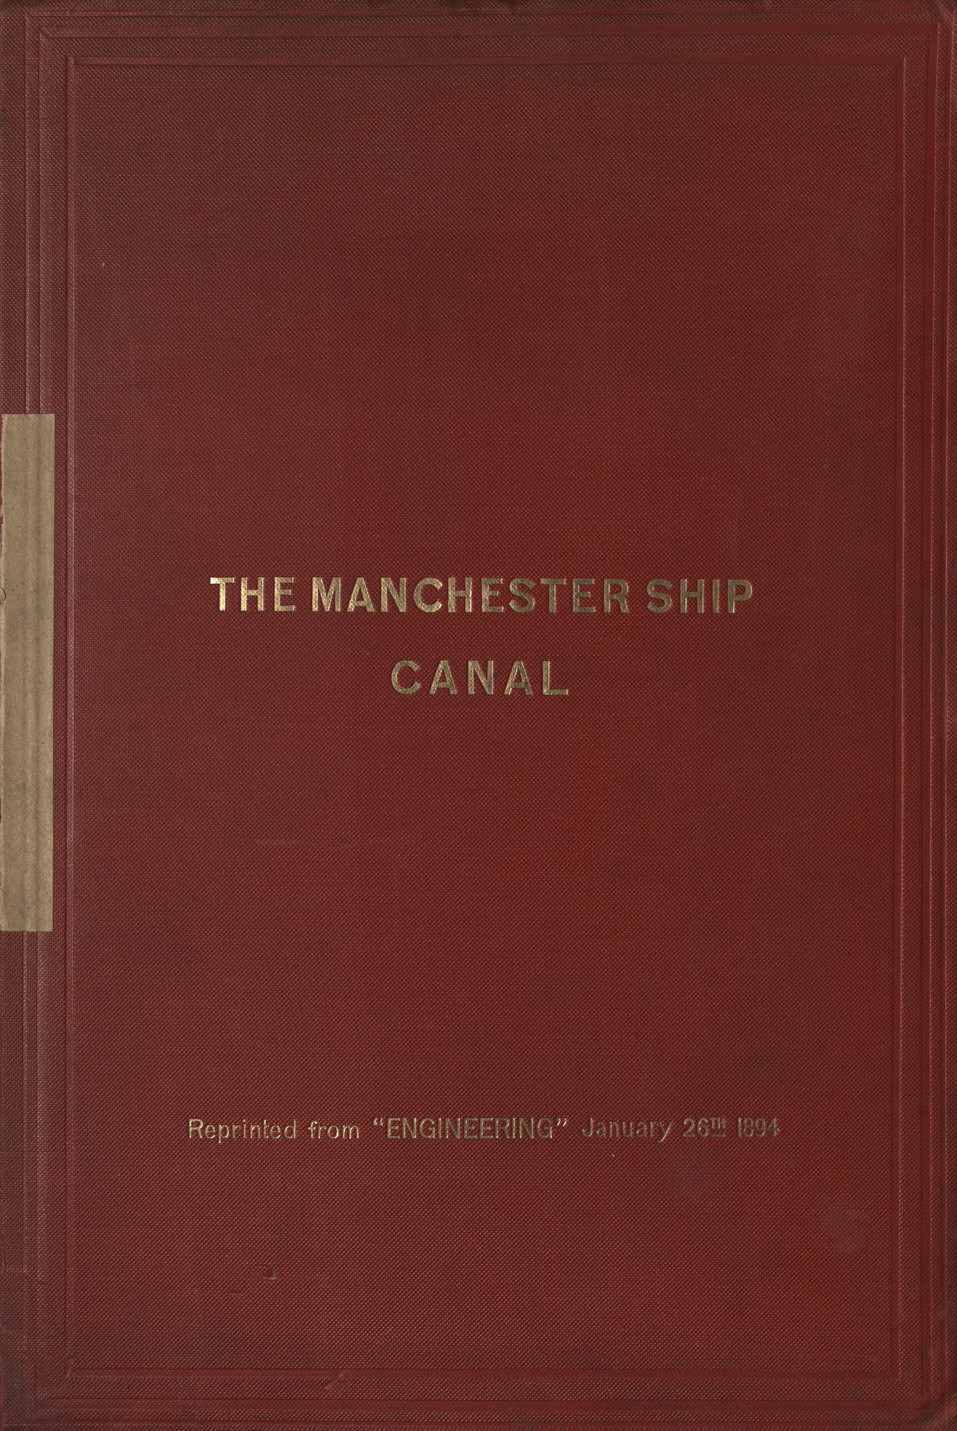 The Manchester ship canal